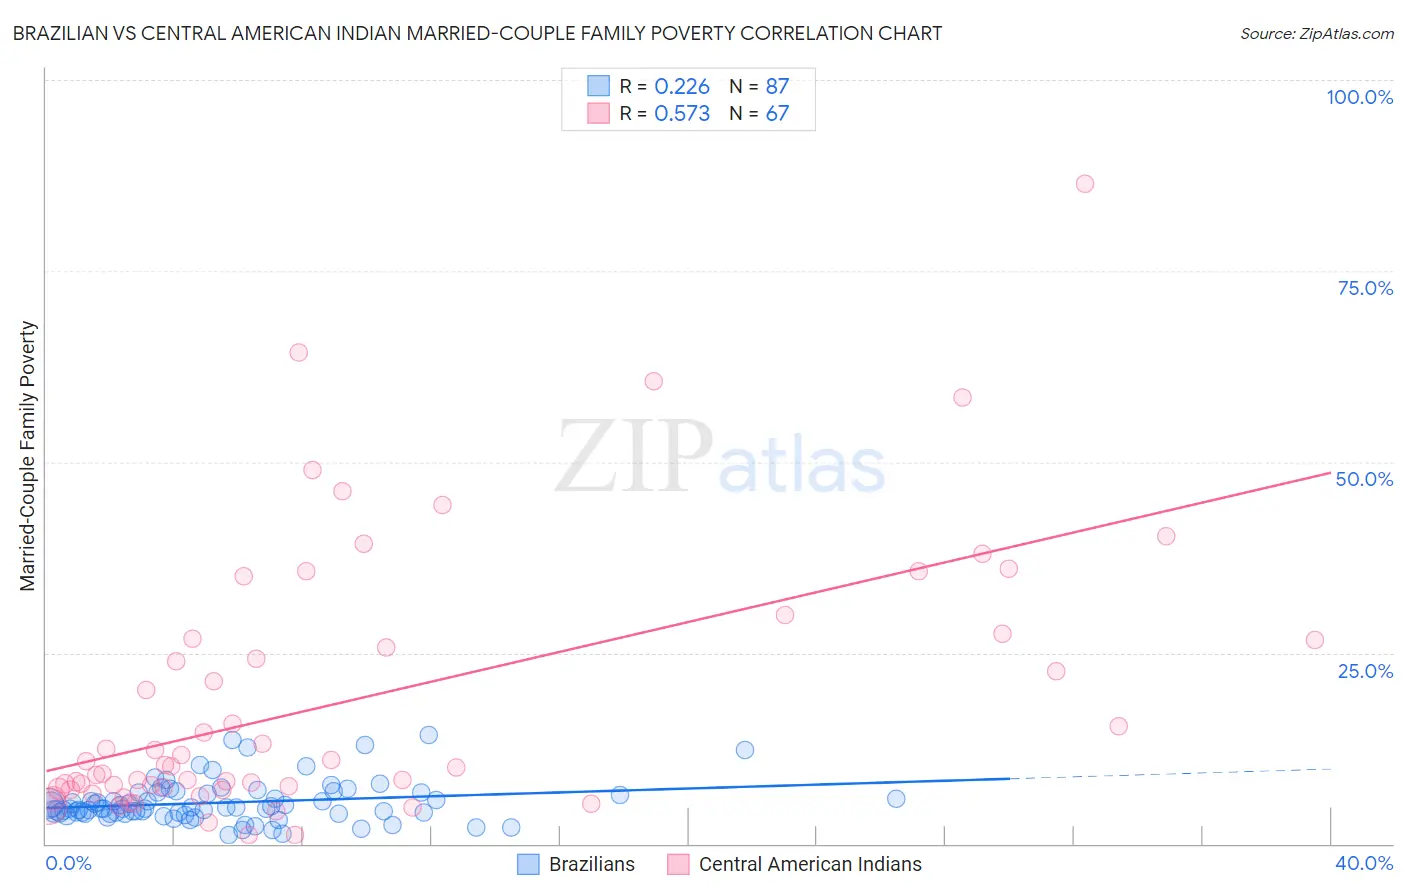 Brazilian vs Central American Indian Married-Couple Family Poverty